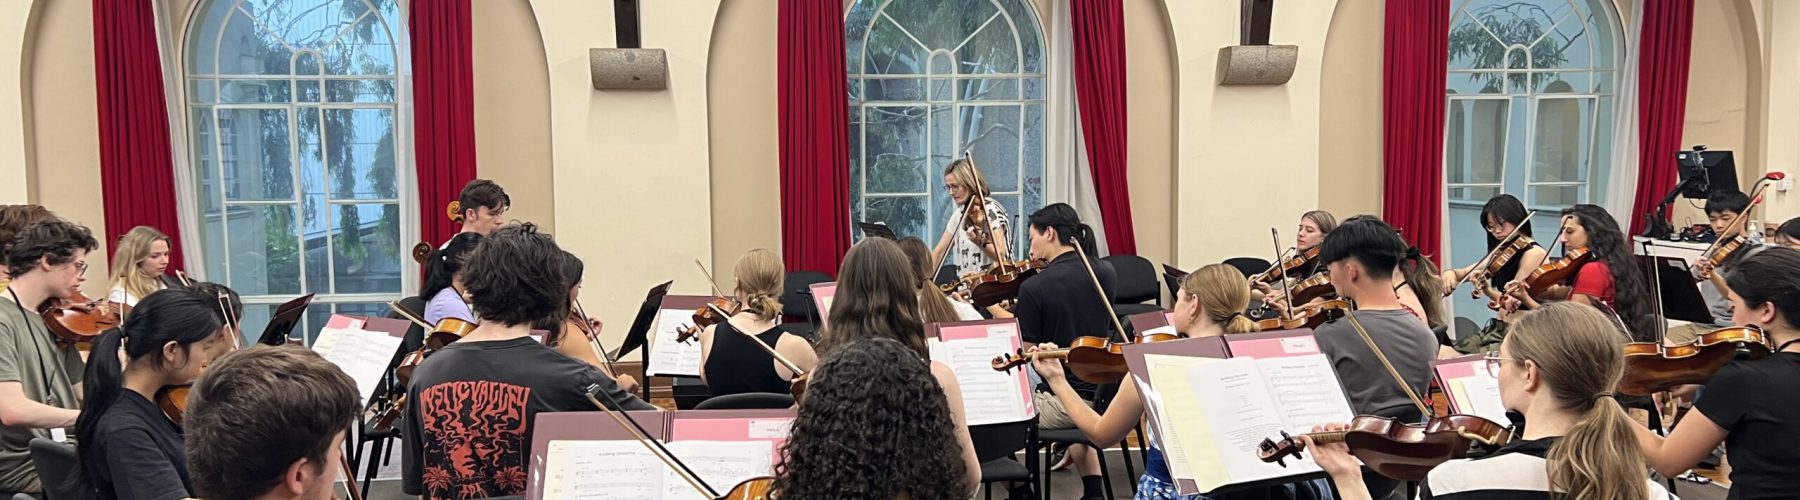 A chamber orchestra rehearses in a room.